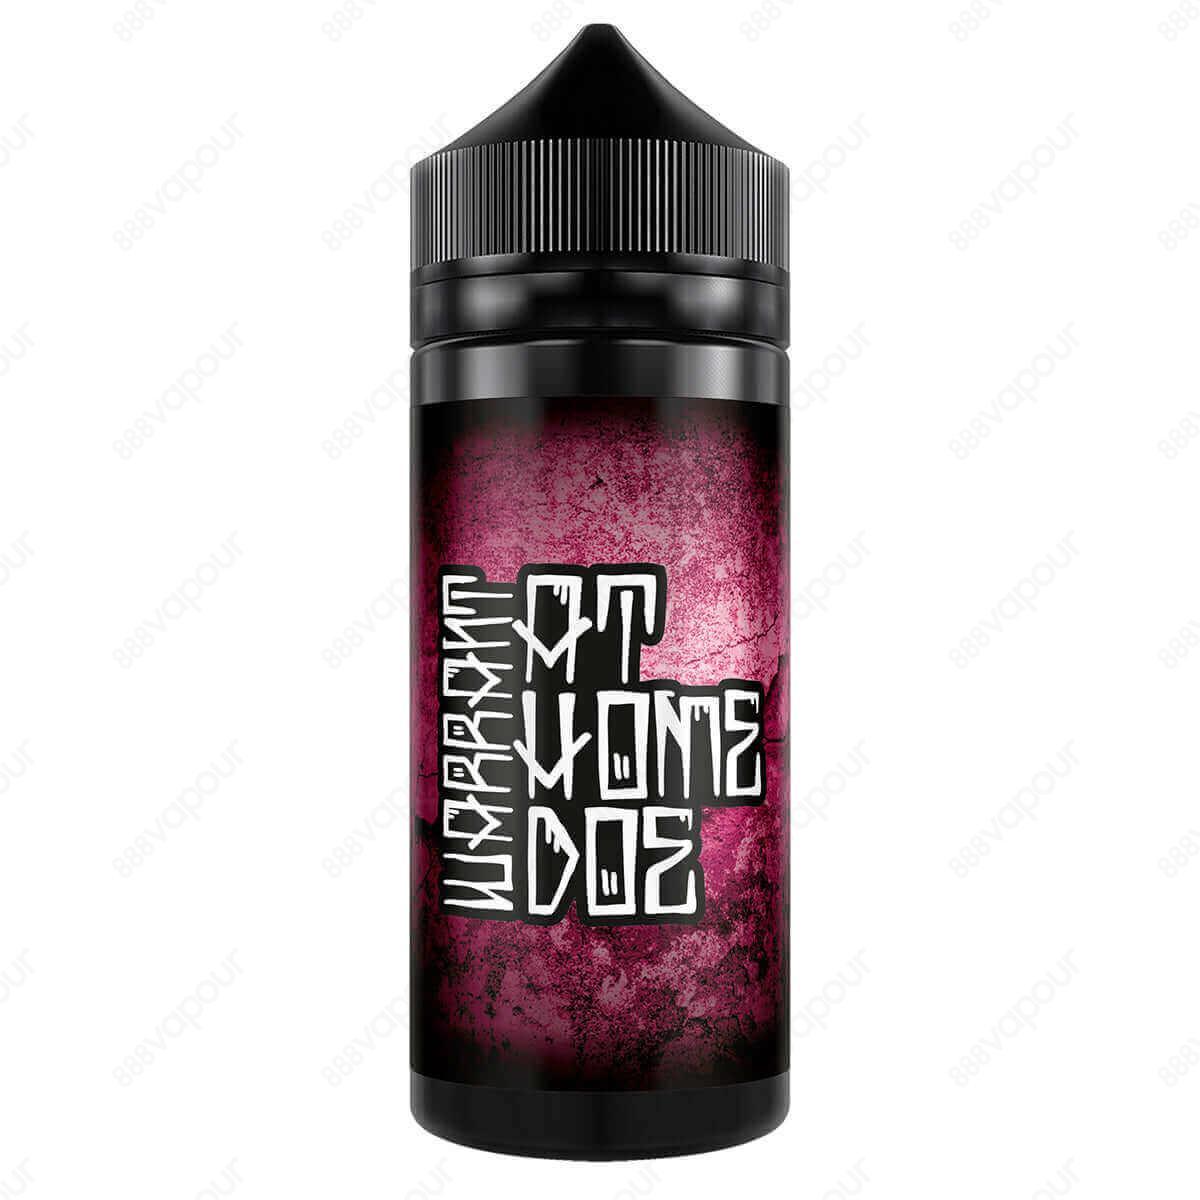 At Home Doe Warrant E-Liquid | £11.99 | 888 Vapour | At Home Doe Warrant e-liquid by The Yorkshire Vaper is a fruity mix of pomegranate and kiwi. Warrant by At Home Doe is available in a 100ml 0mg shortfill, with space to add two 10ml 18mg nicotine shots